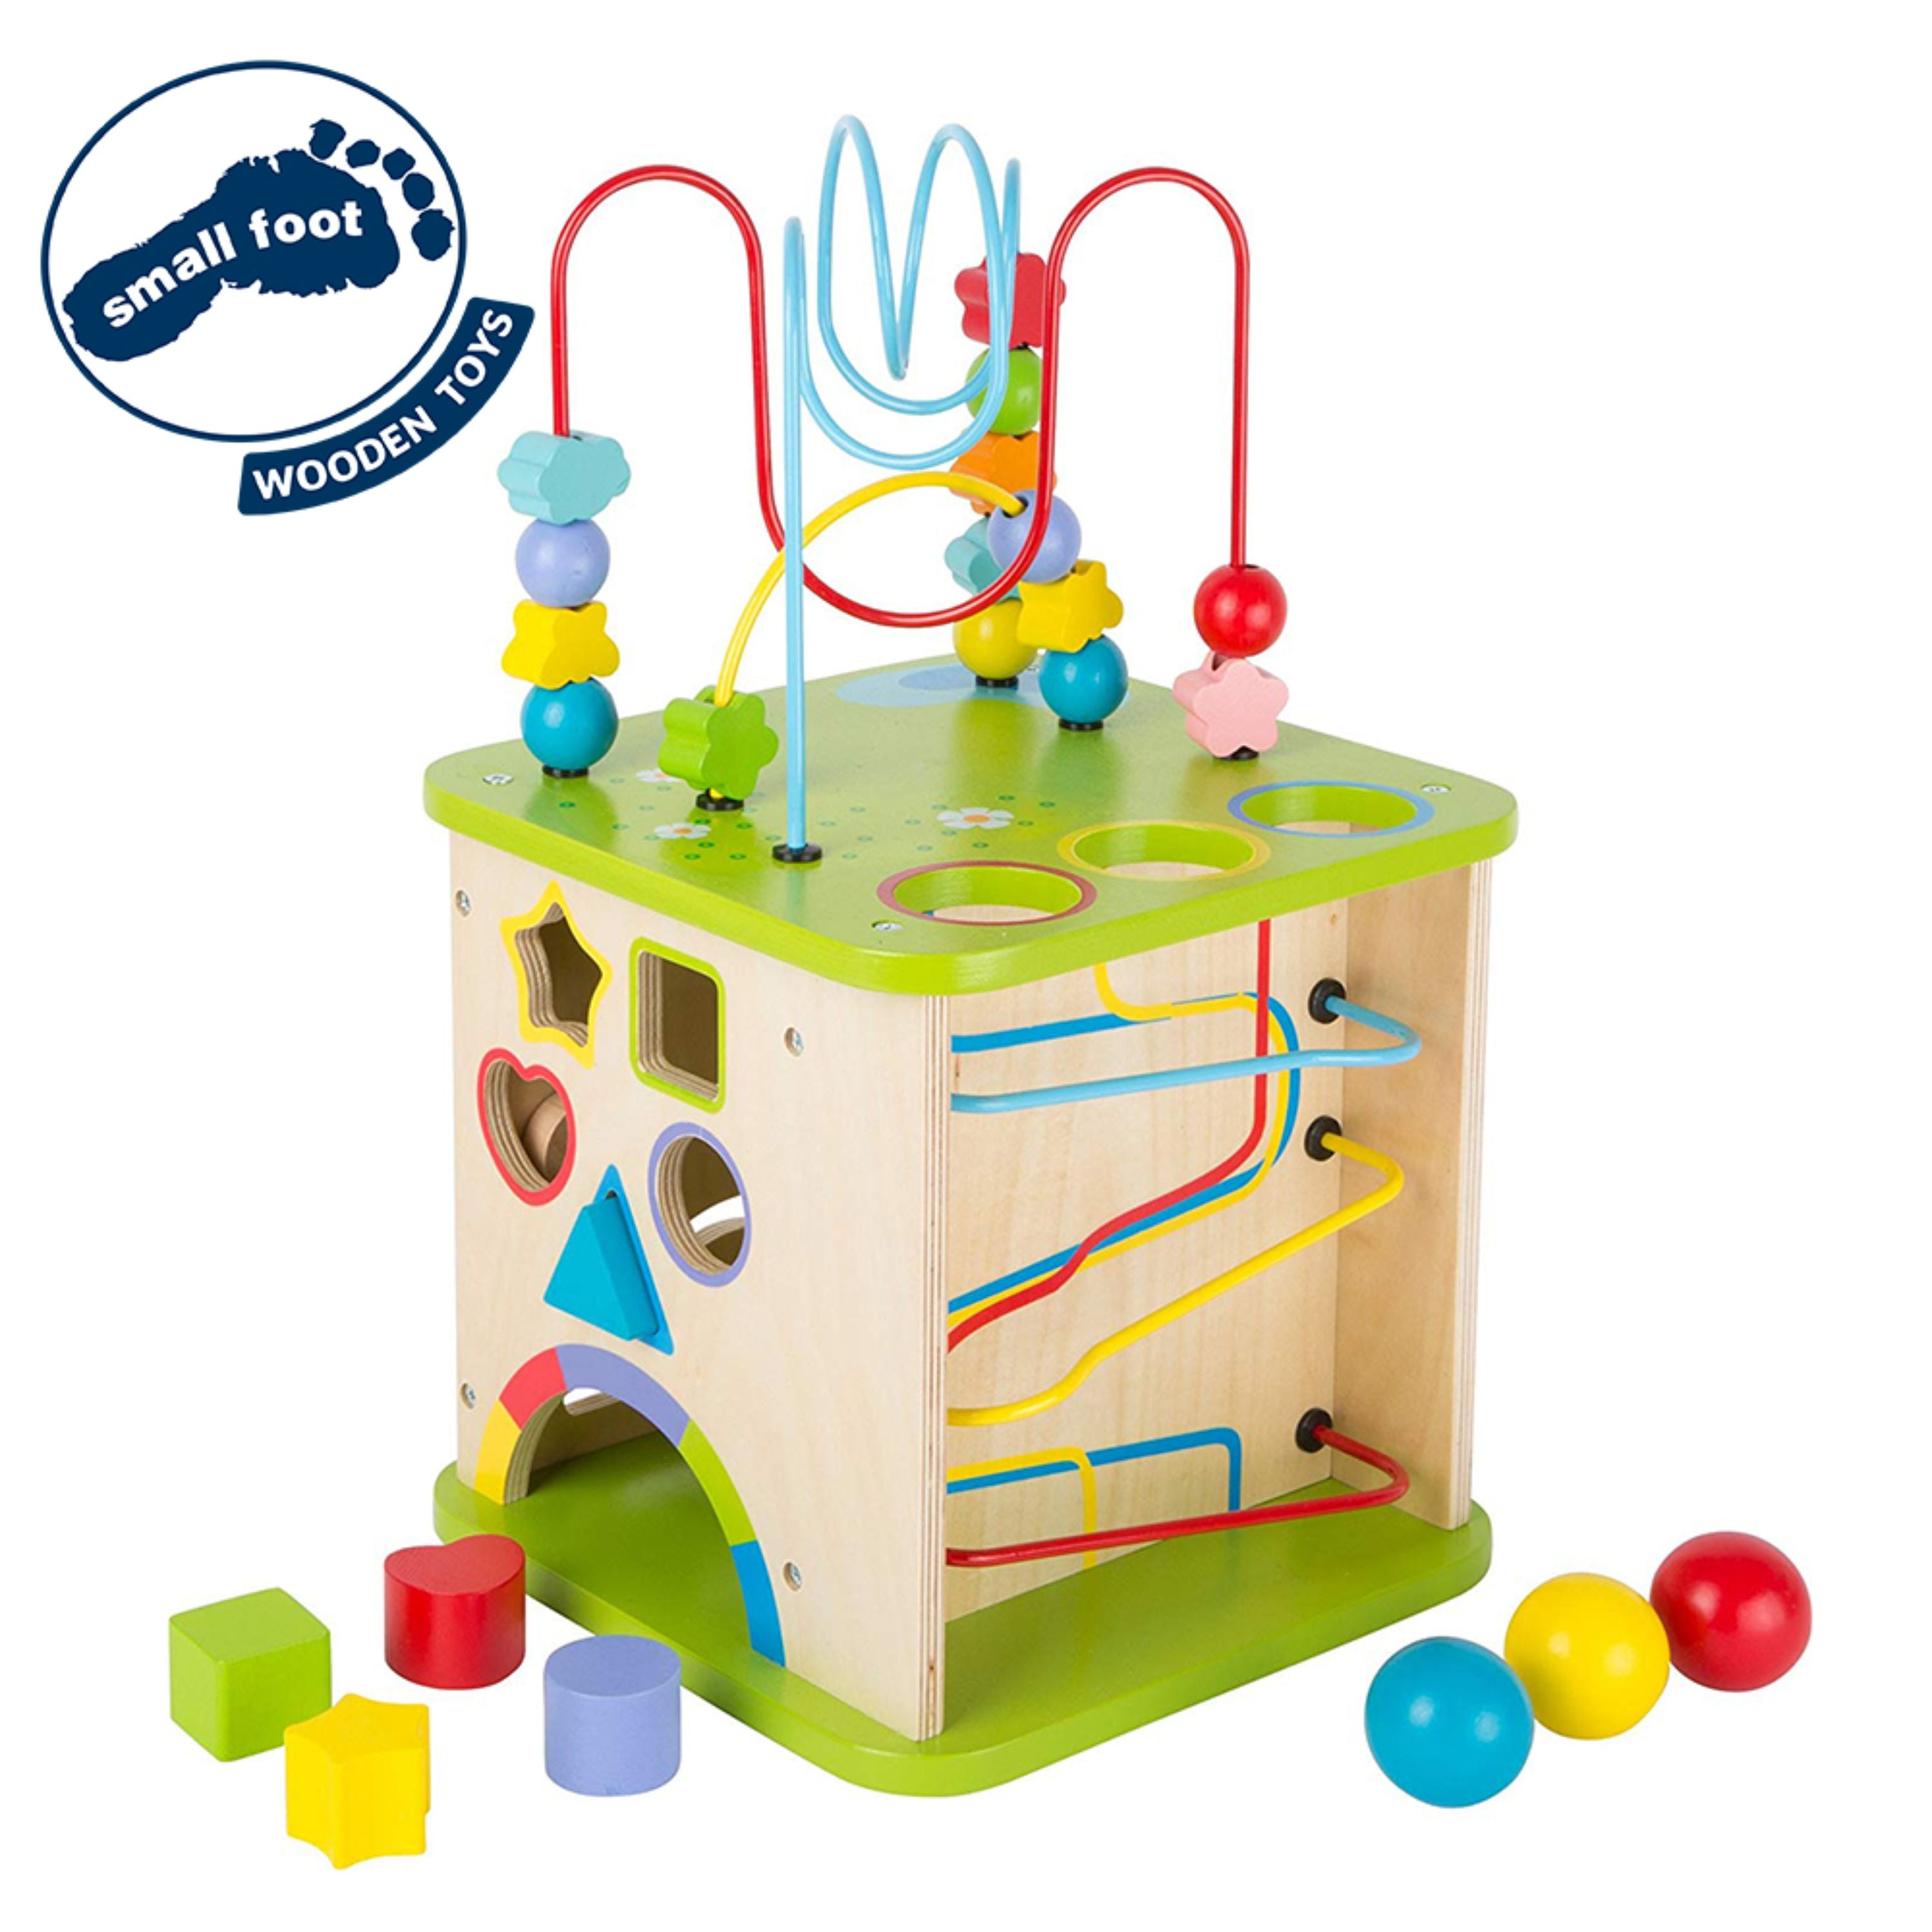 Wooden Knock Ball Ladder Toy,Knock Ball The Ladder Deluxe Pound and Roll Tower Creativity Developing Wooden Toy Classic Pounding Toys for Toddlers